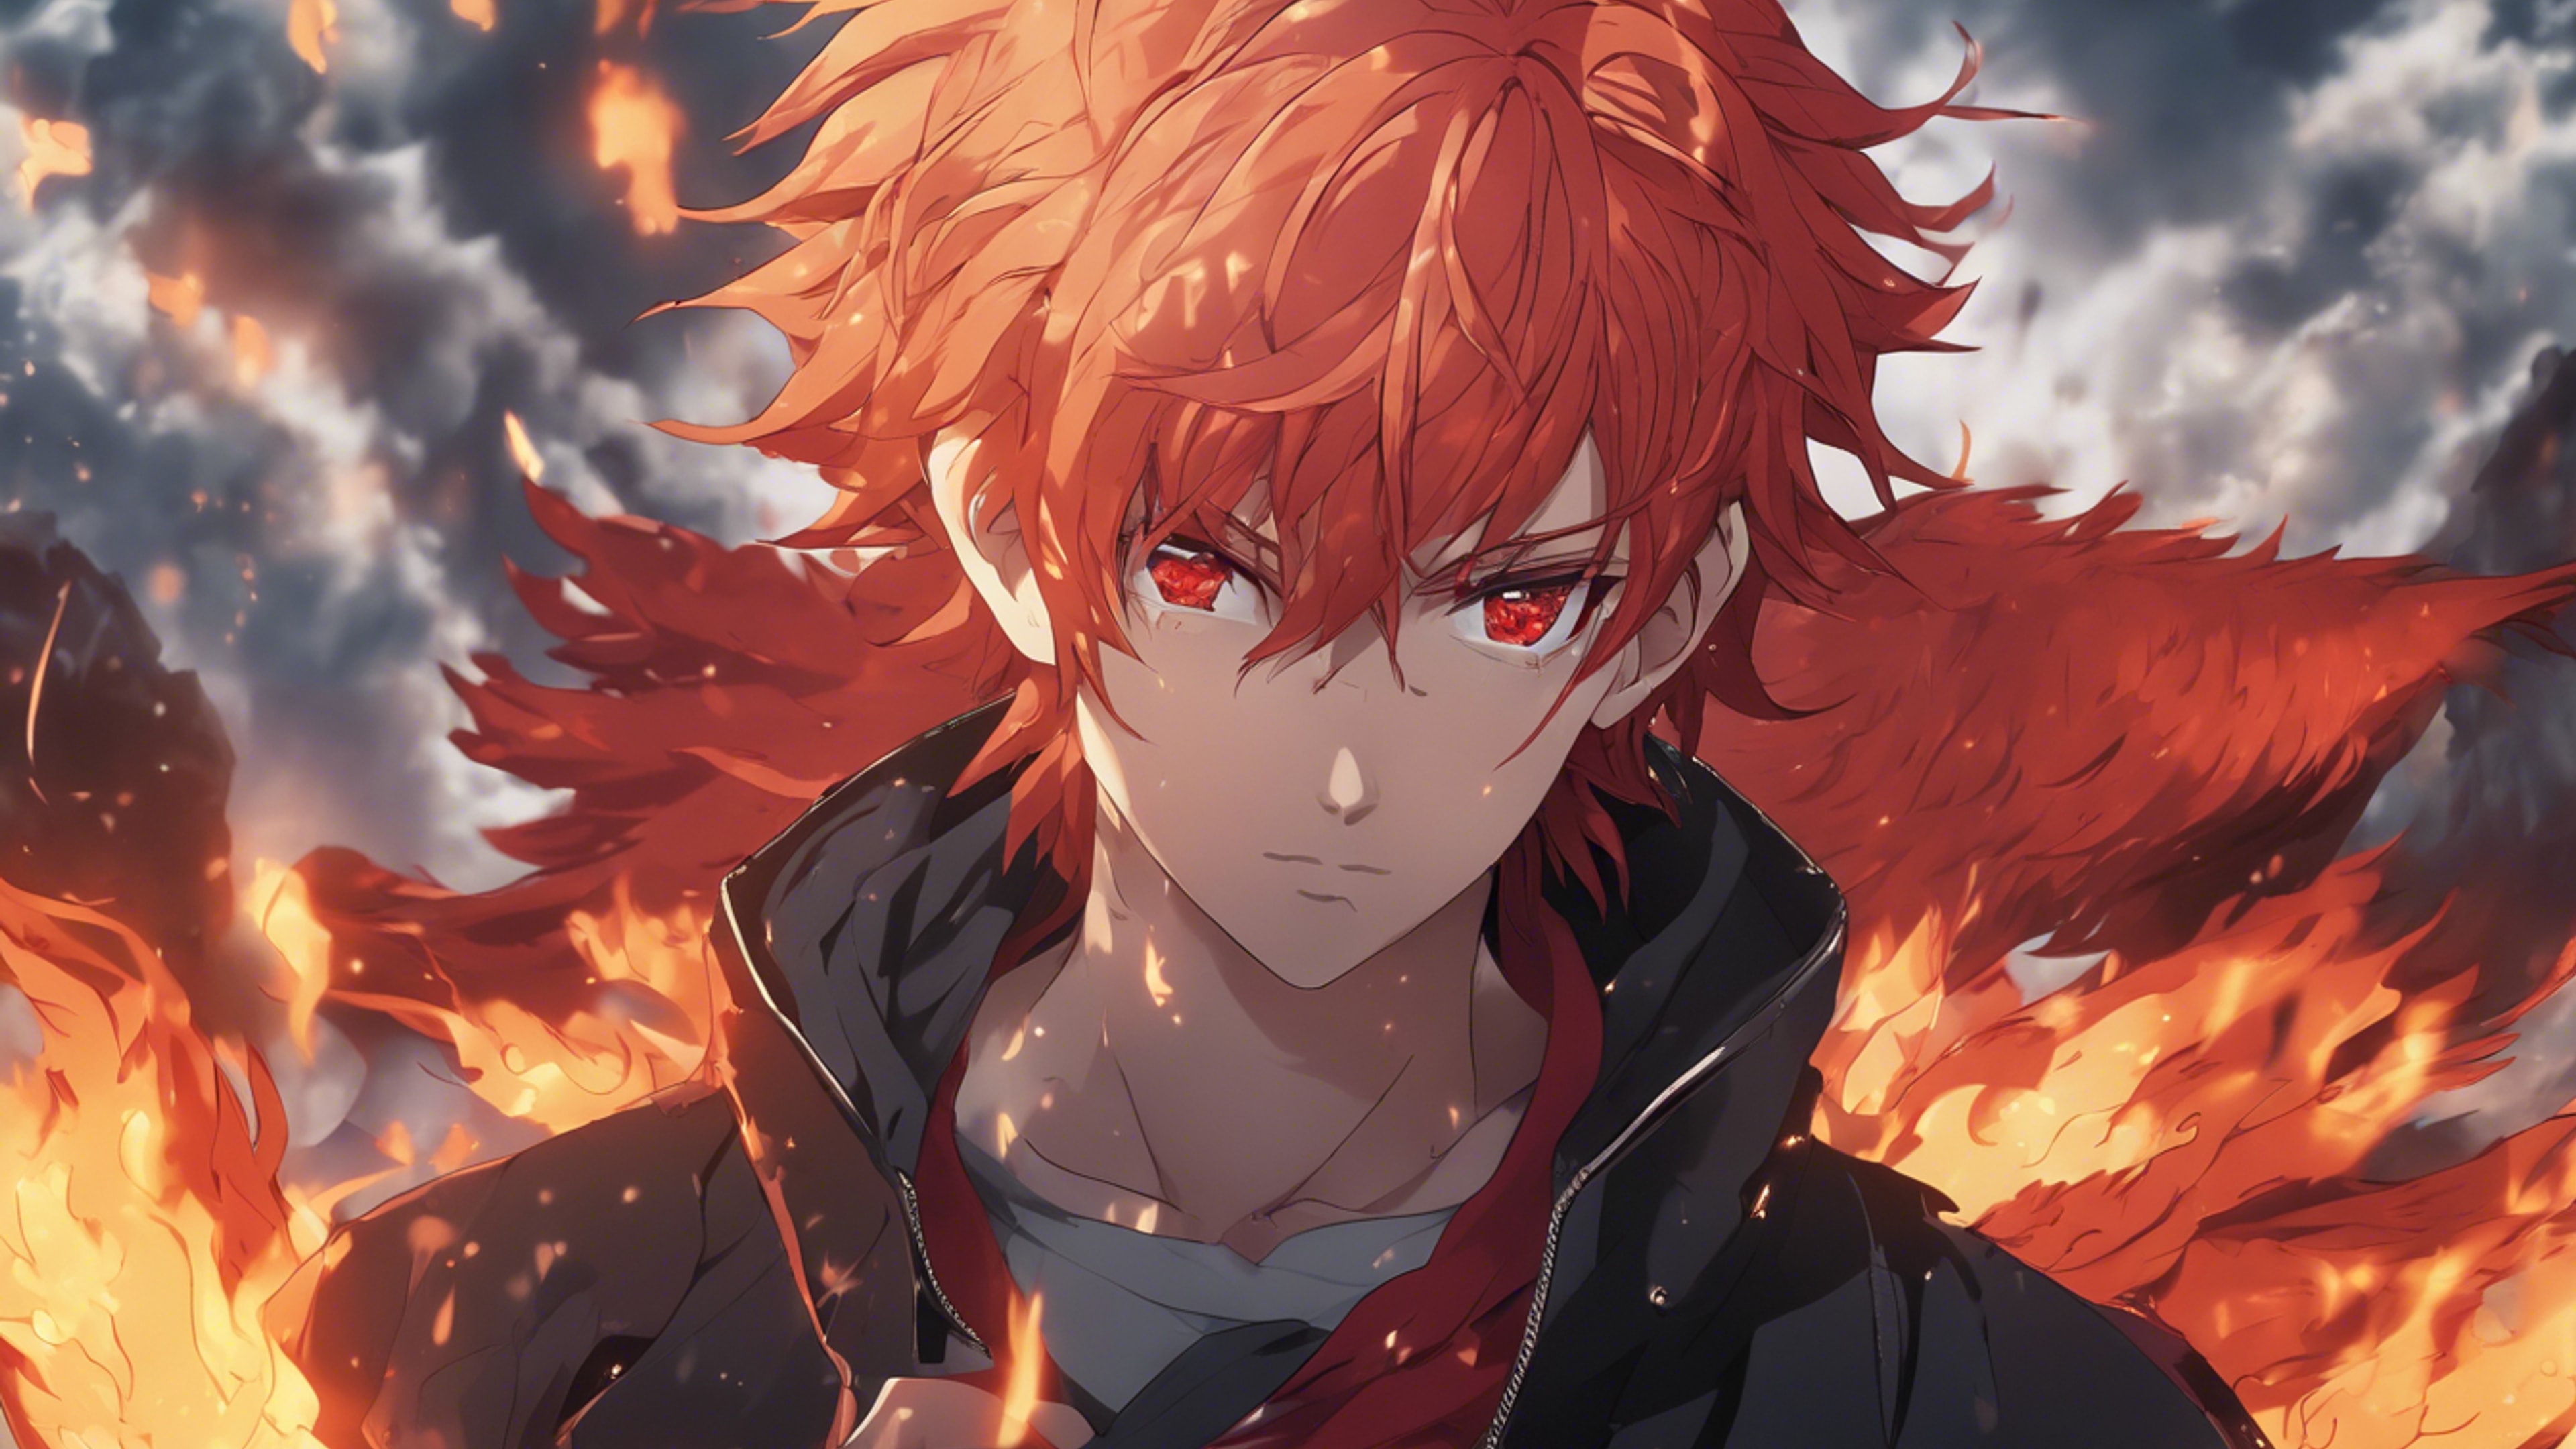 An anime boy with striking red hair and phoenix eyes standing amid flames. Wallpaper[1e7f0b8f53424f7d9857]